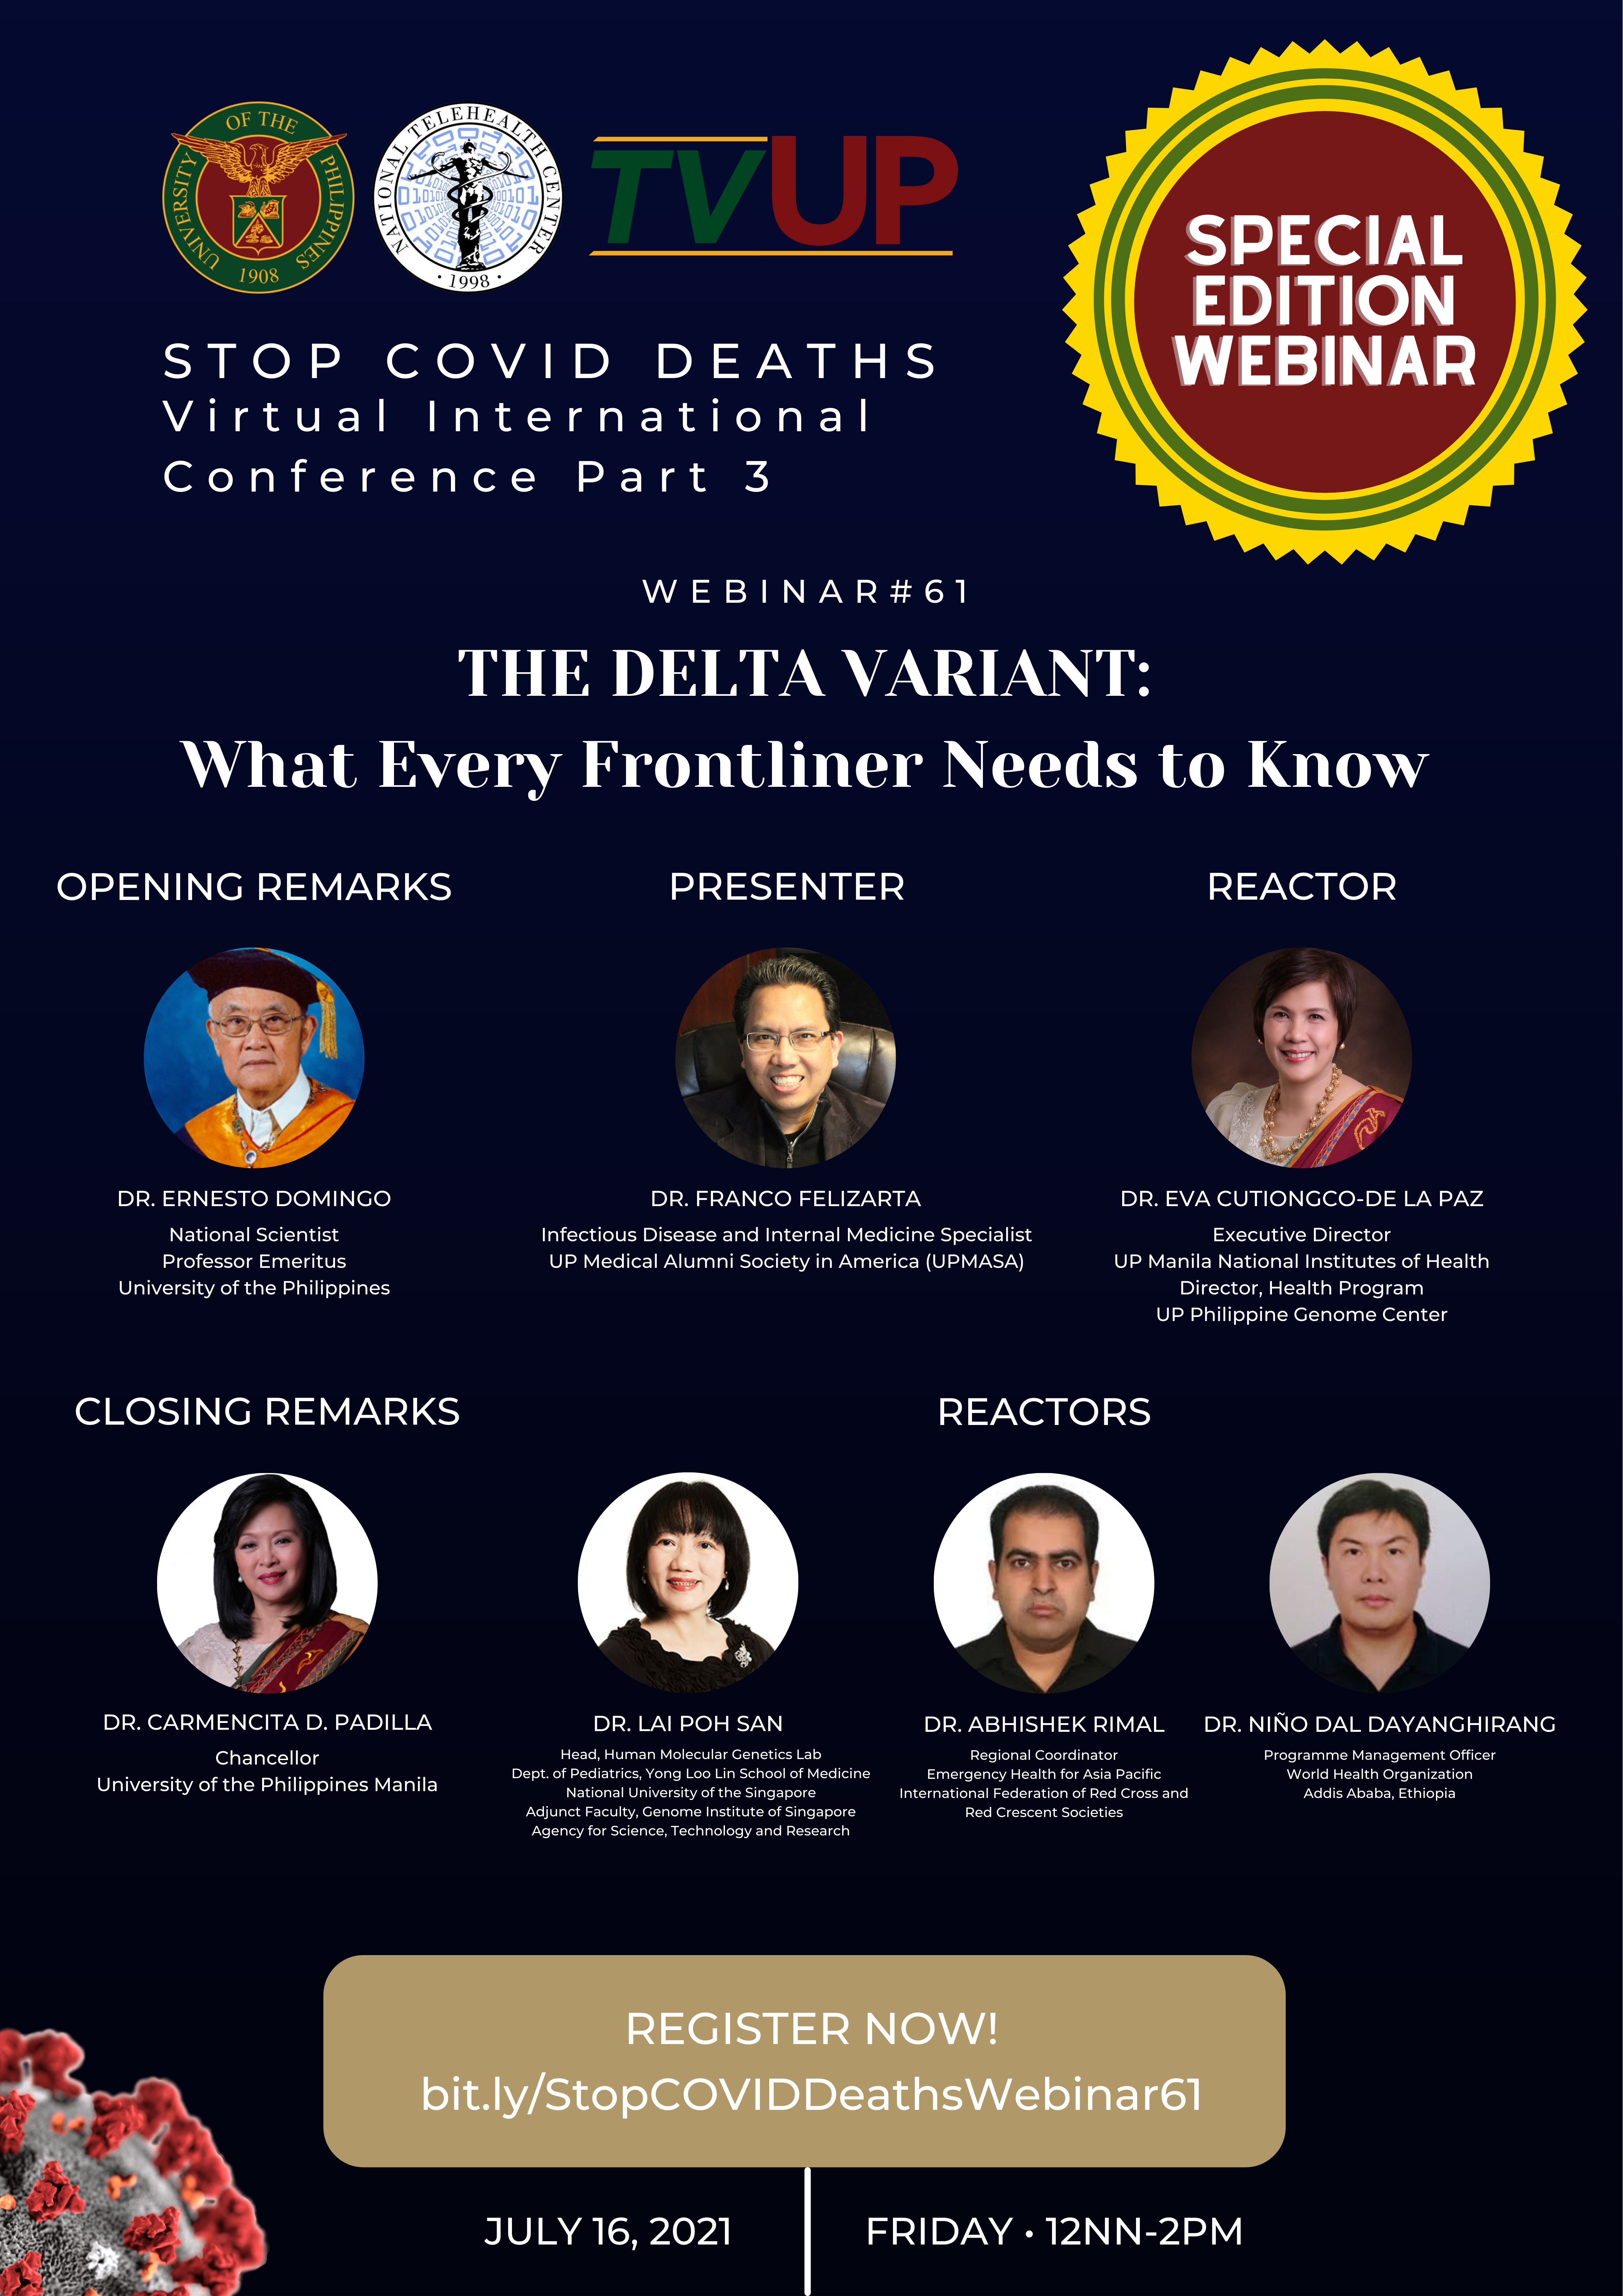 Webinar #61 Virtual International Conference Part 3 "THE DELTA VARIANT: What Every Frontliner Needs to Know"